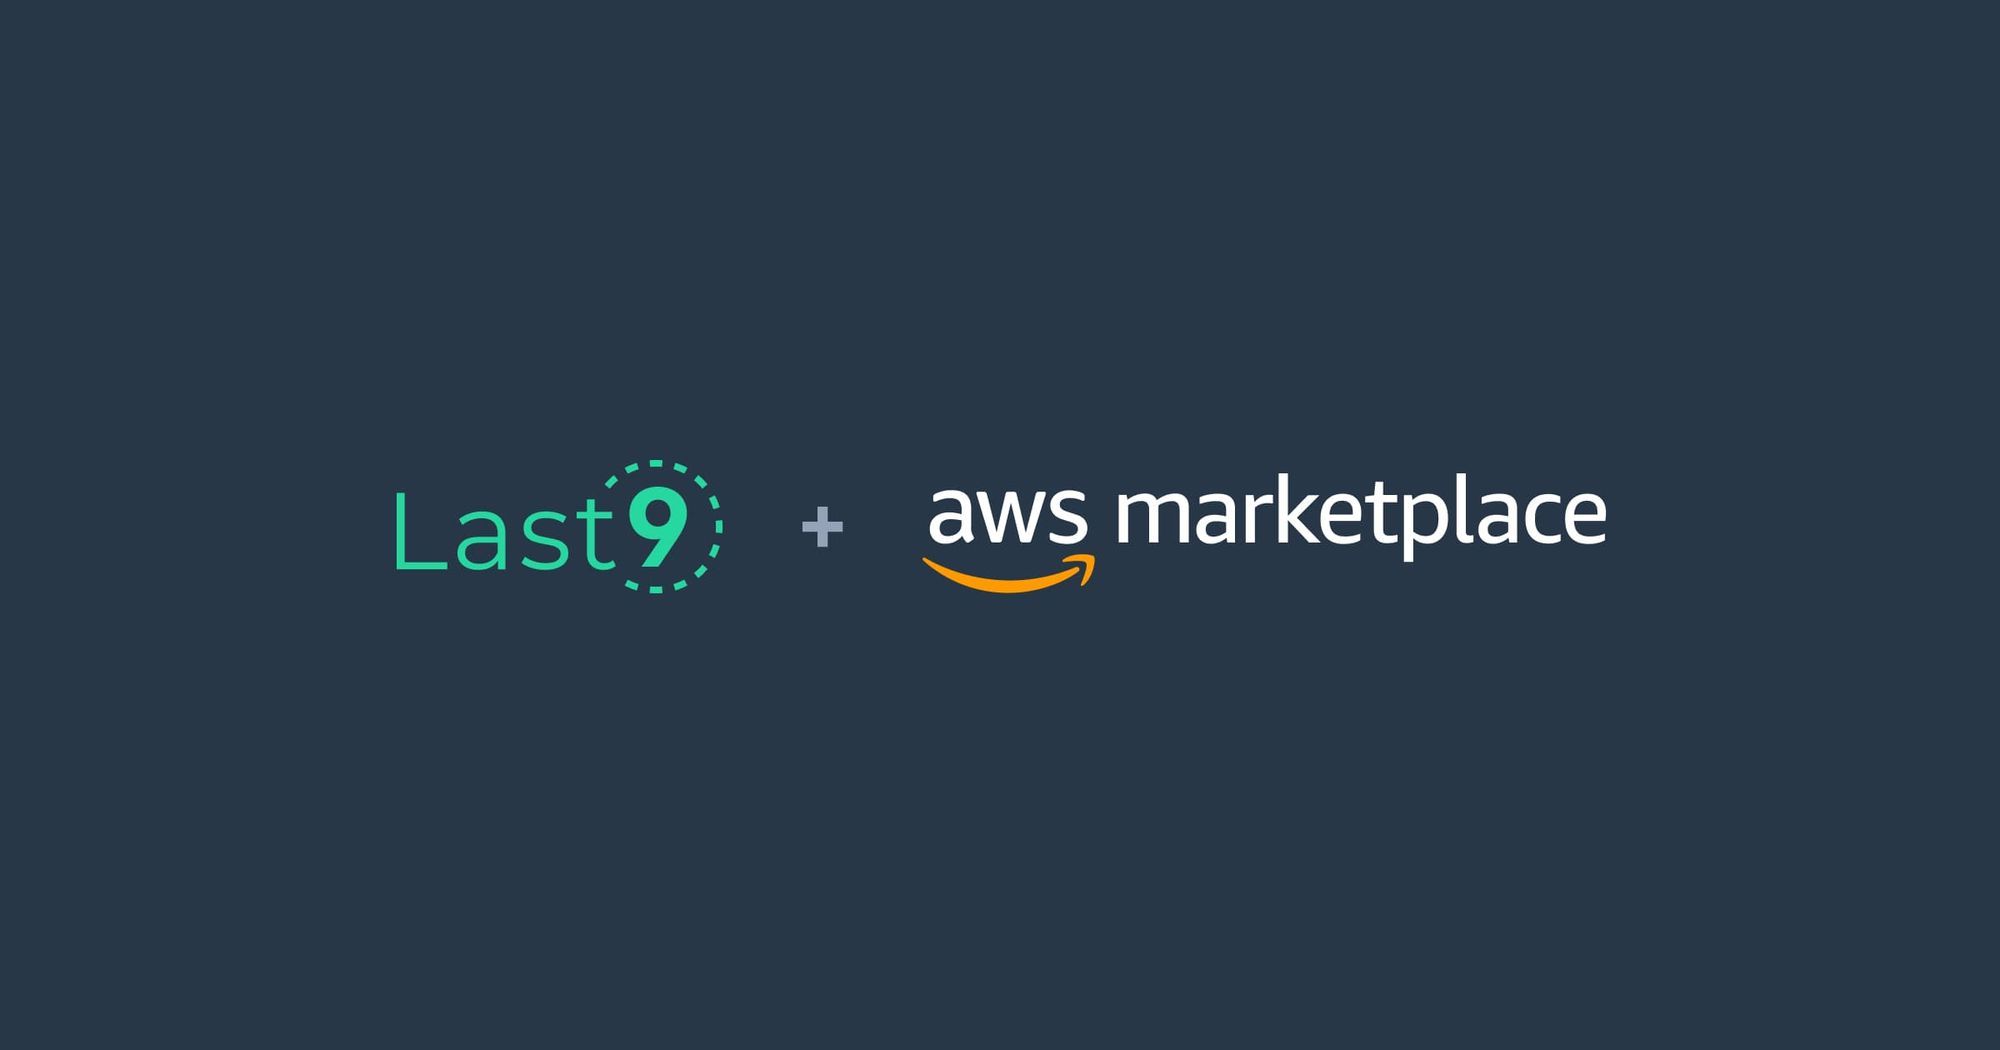 Levitate - Last9’s managed TSDB is now available on the AWS Marketplace